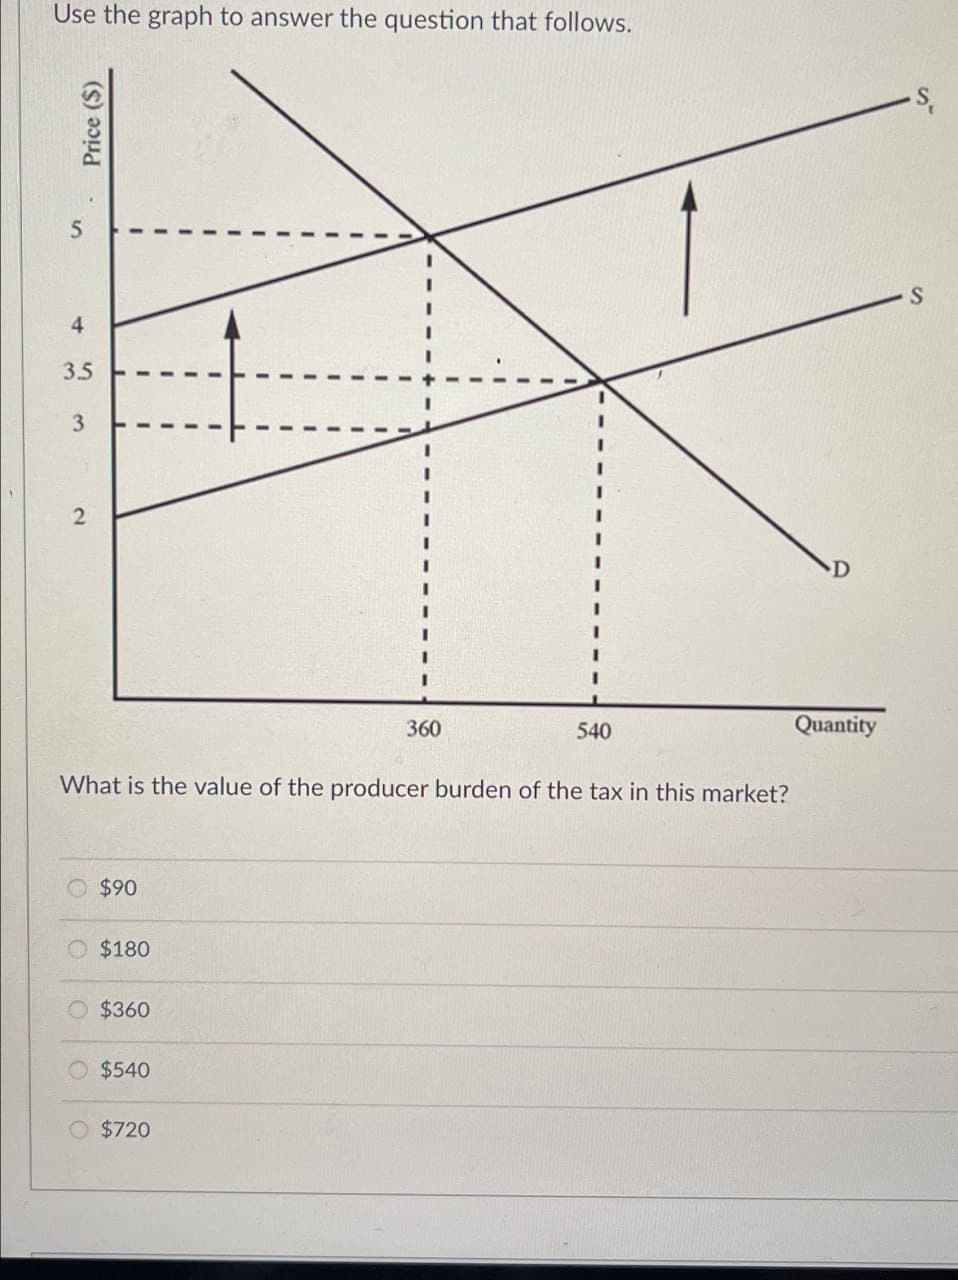 5
4
3.5
3
2
Use the graph to answer the question that follows.
Price ($)
I
I
I
360
540
What is the value of the producer burden of the tax in this market?
$90
$180
$360
$540
O $720
Quantity
S
S